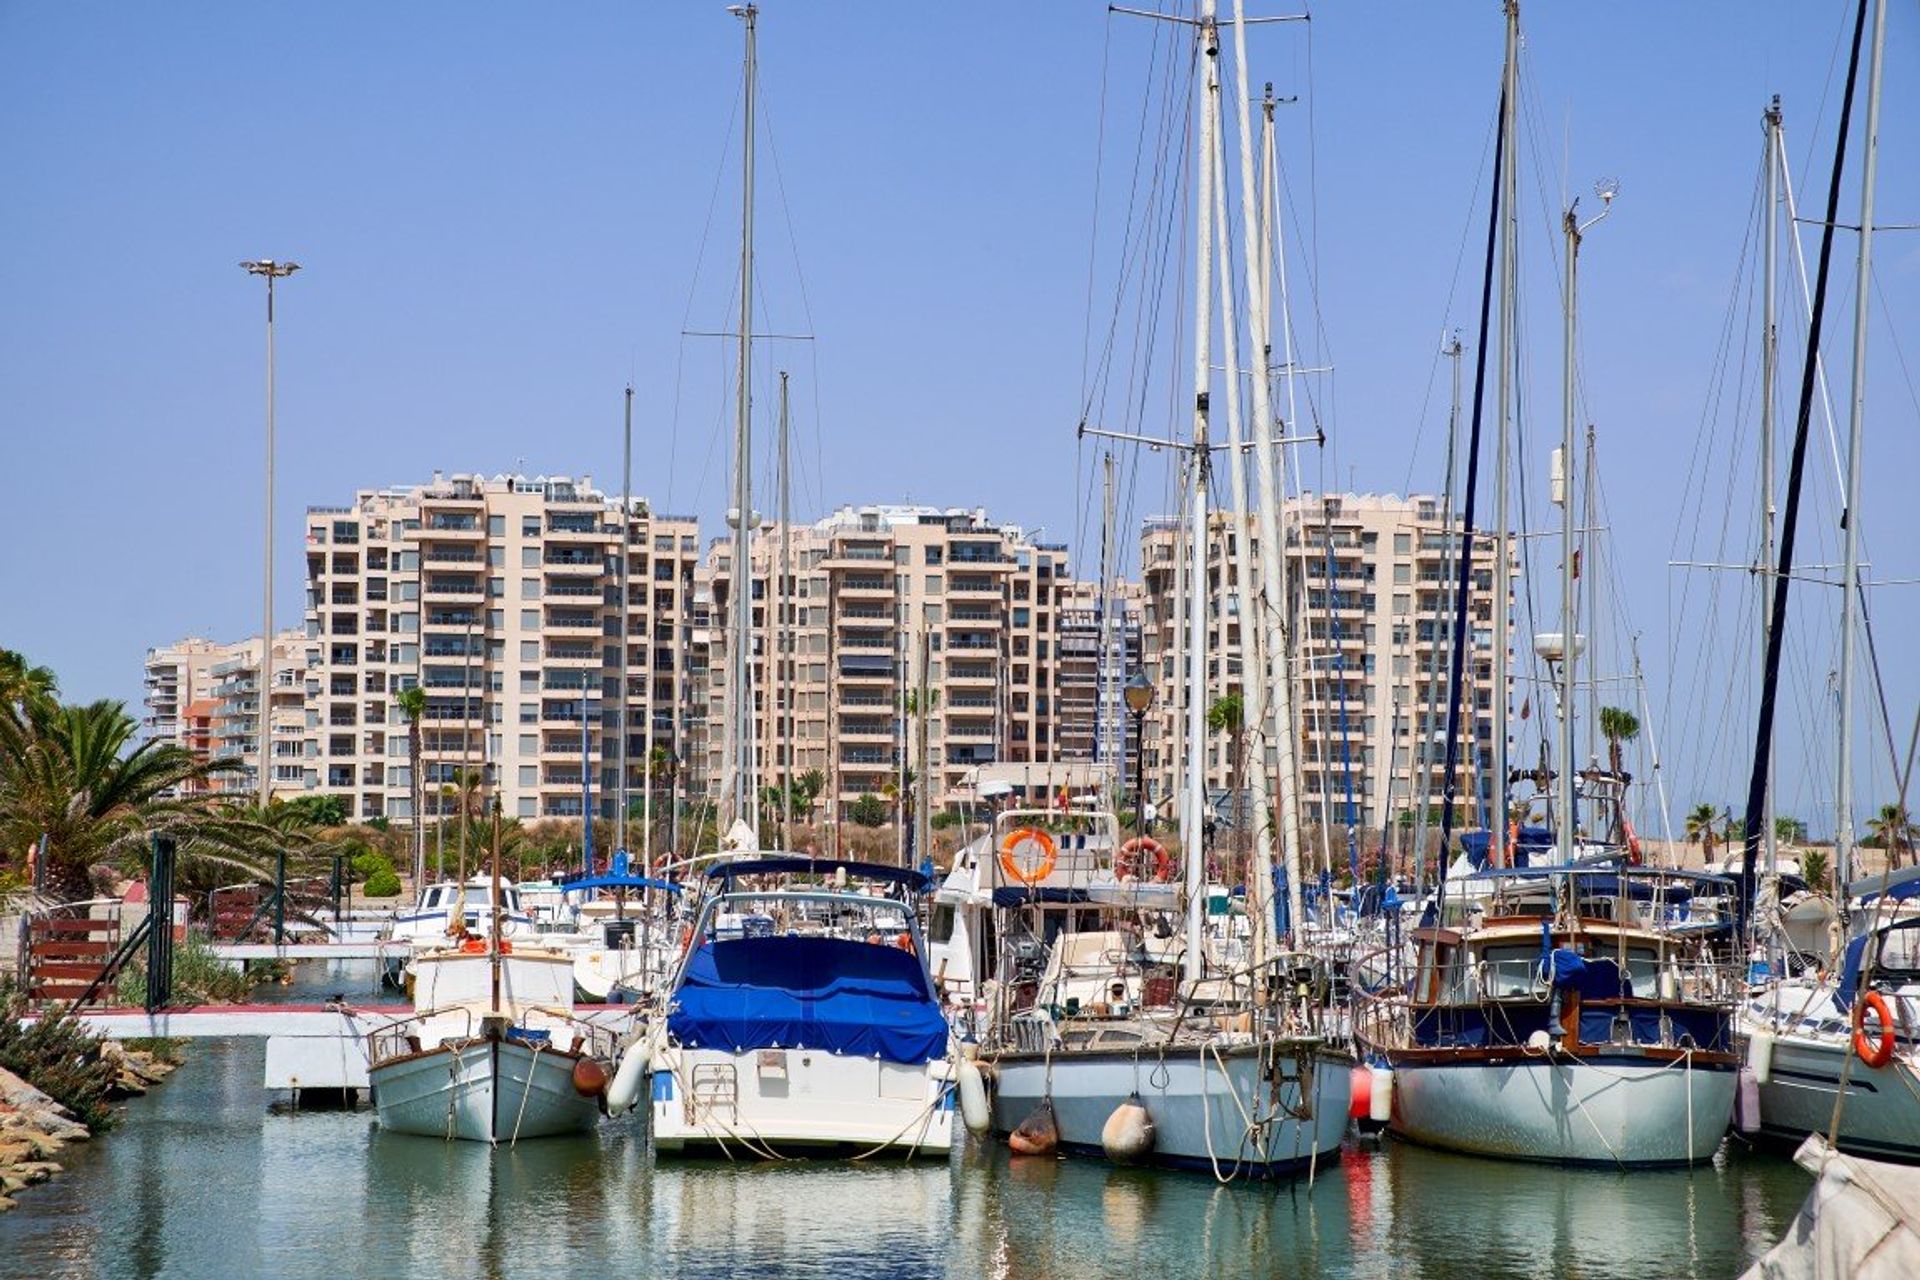 Take a stroll from the sand dunes to the seaport of Marina les Dunas and watch the world go by